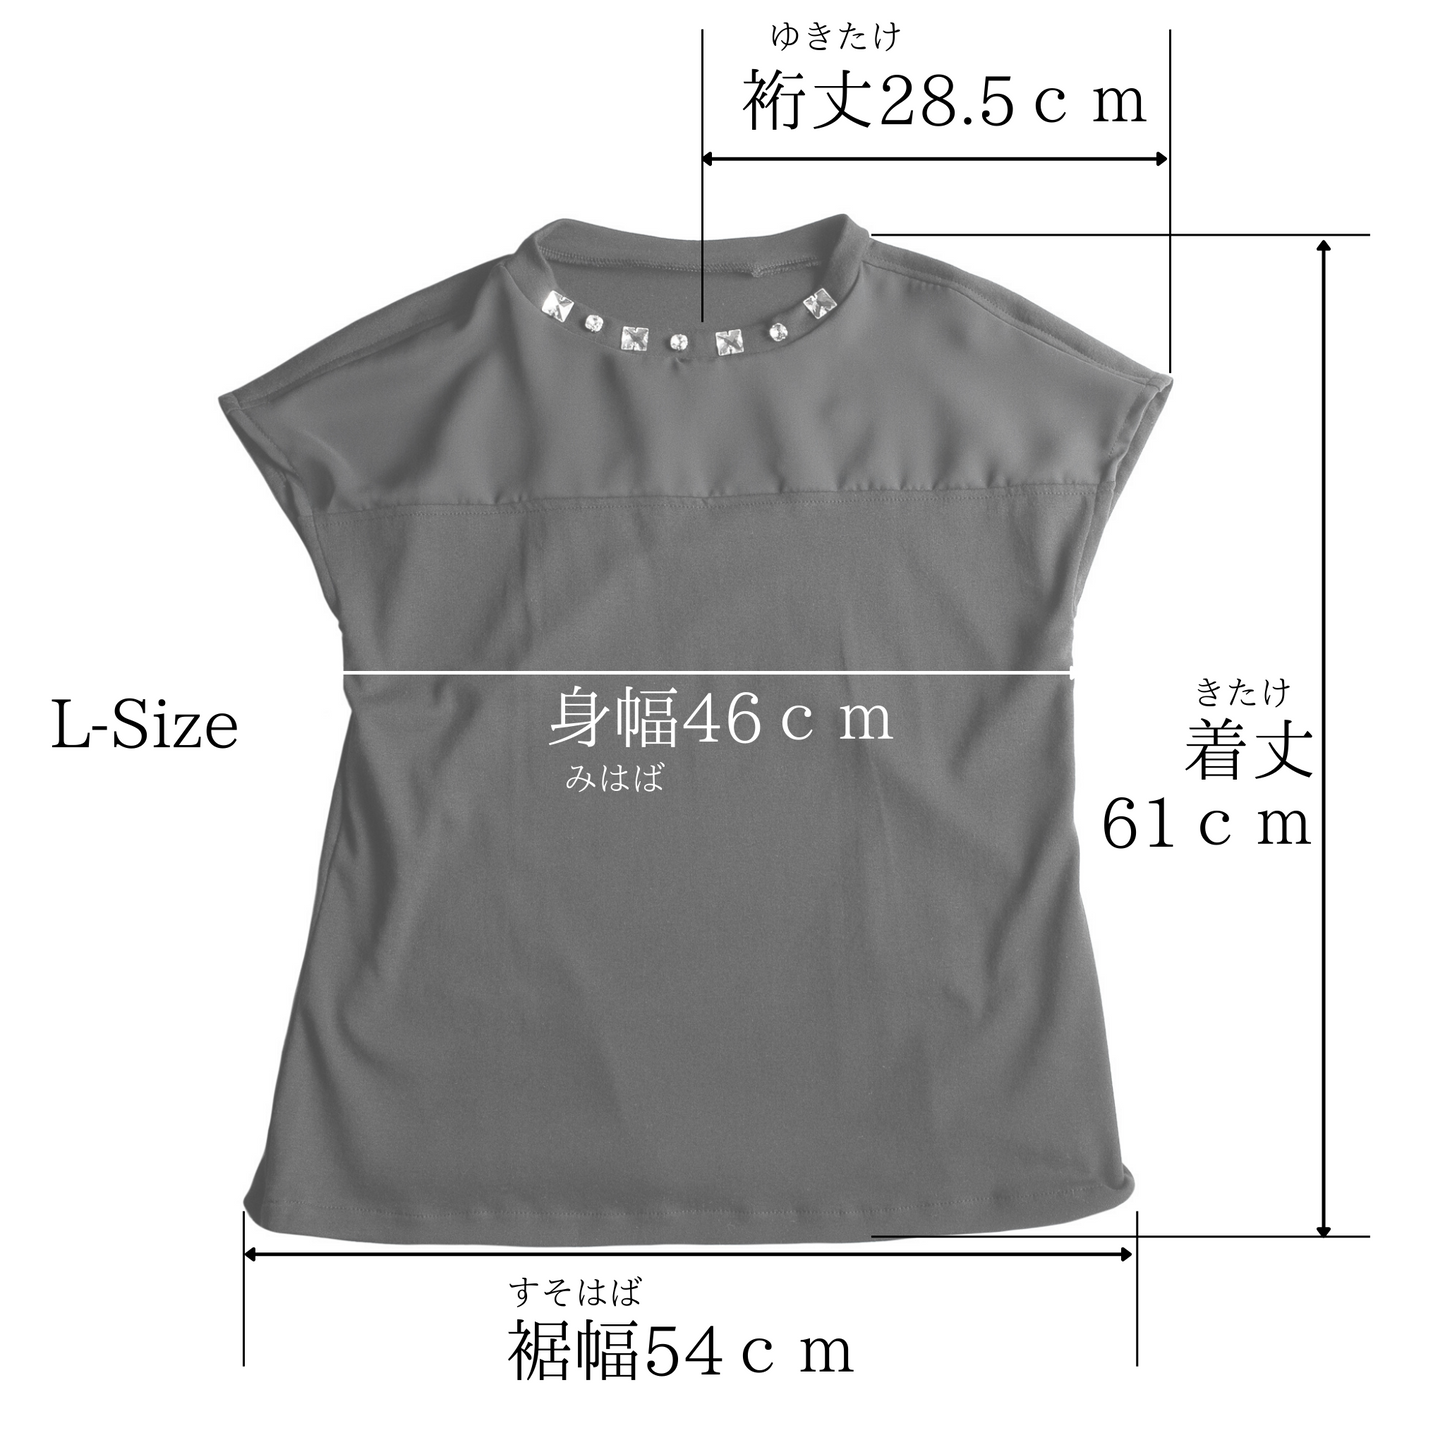 PSNY Adult Coordinate French Sleeve T-shirt - See-through Bijou 2 Tops TP05